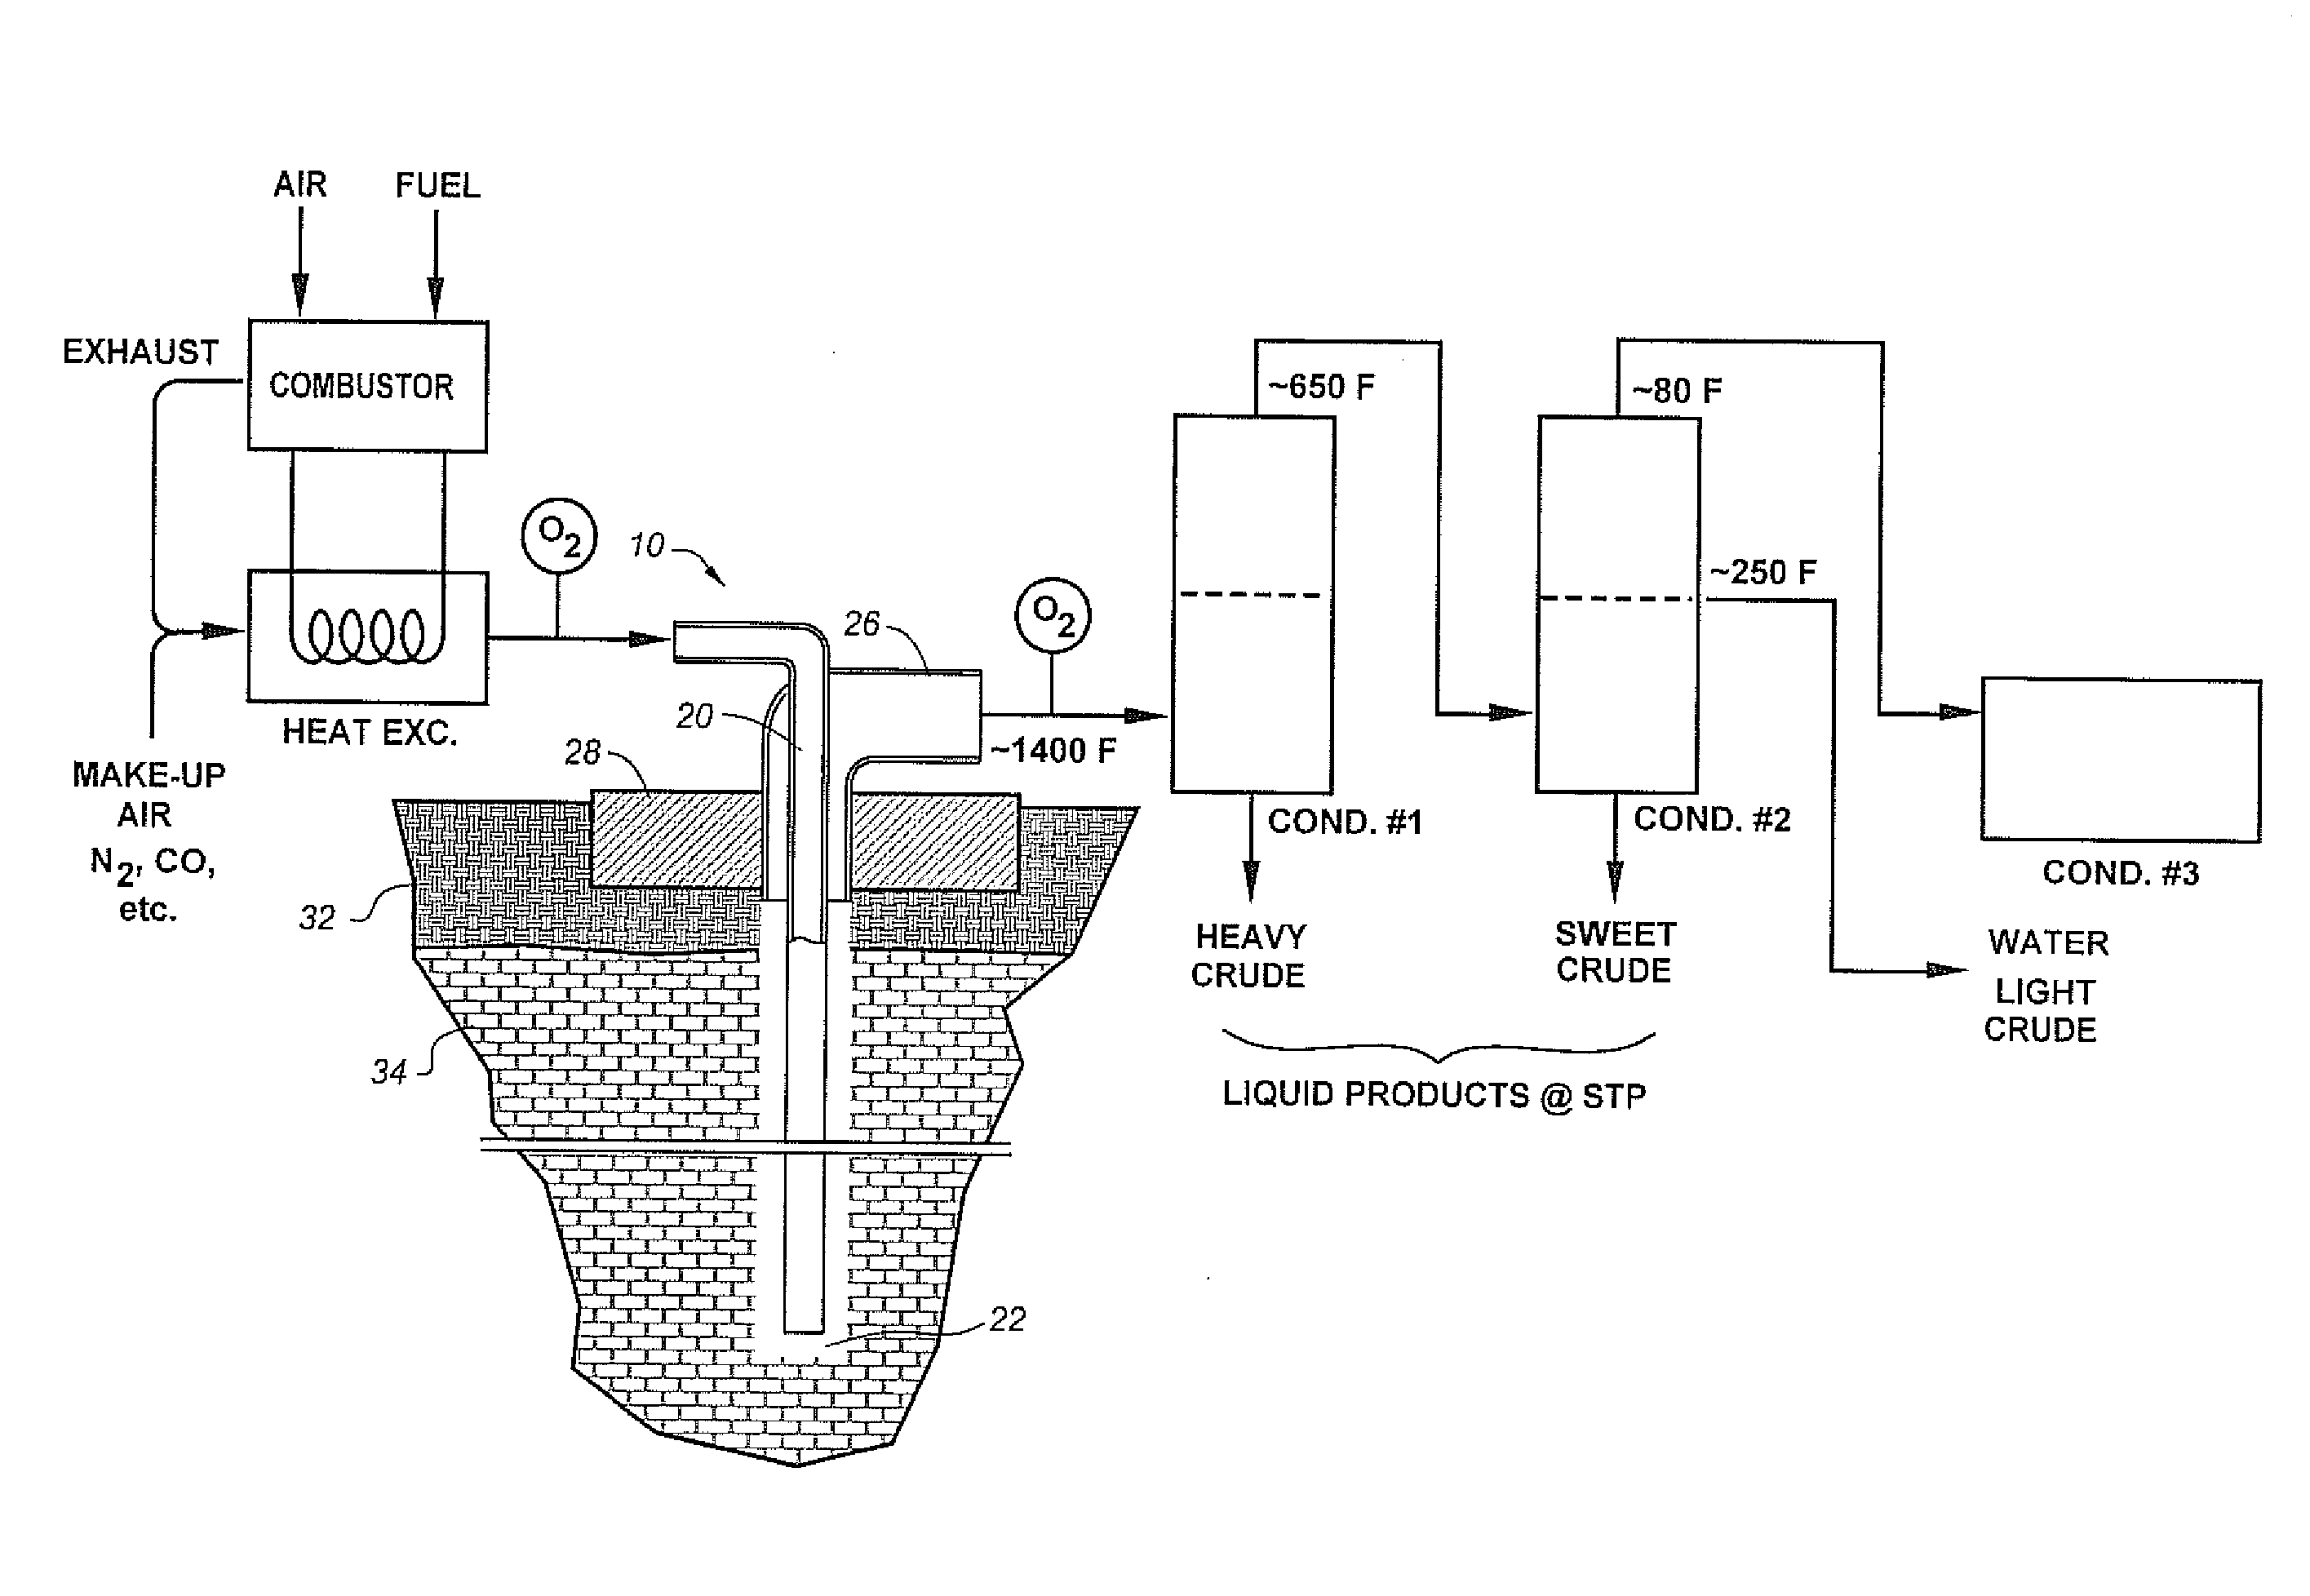 Apparatus and methods for the recovery of hydrocarbonaceous and additional products from oil shale and sands via multi-stage condensation